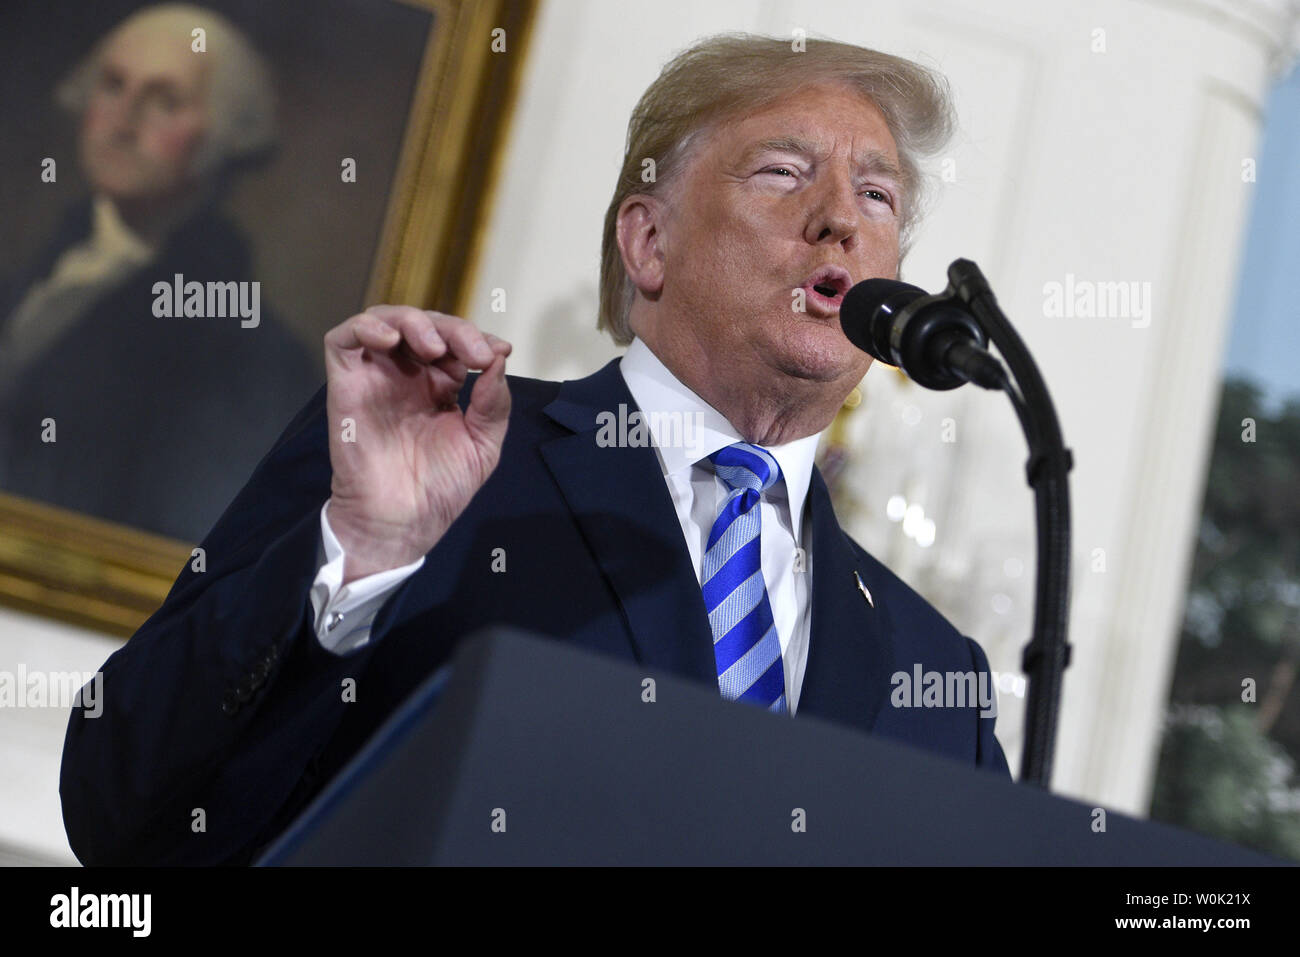 President Donald Trump announces his decision to end the United States participation in the Joint Comprehensive Plan of Action (JCPOA) with Iran and his plans re-impose sanctions lifted under the deal at the White House in Washington, D.C on May 8, 2018. Photo by Leigh Vogel/UPI Stock Photo